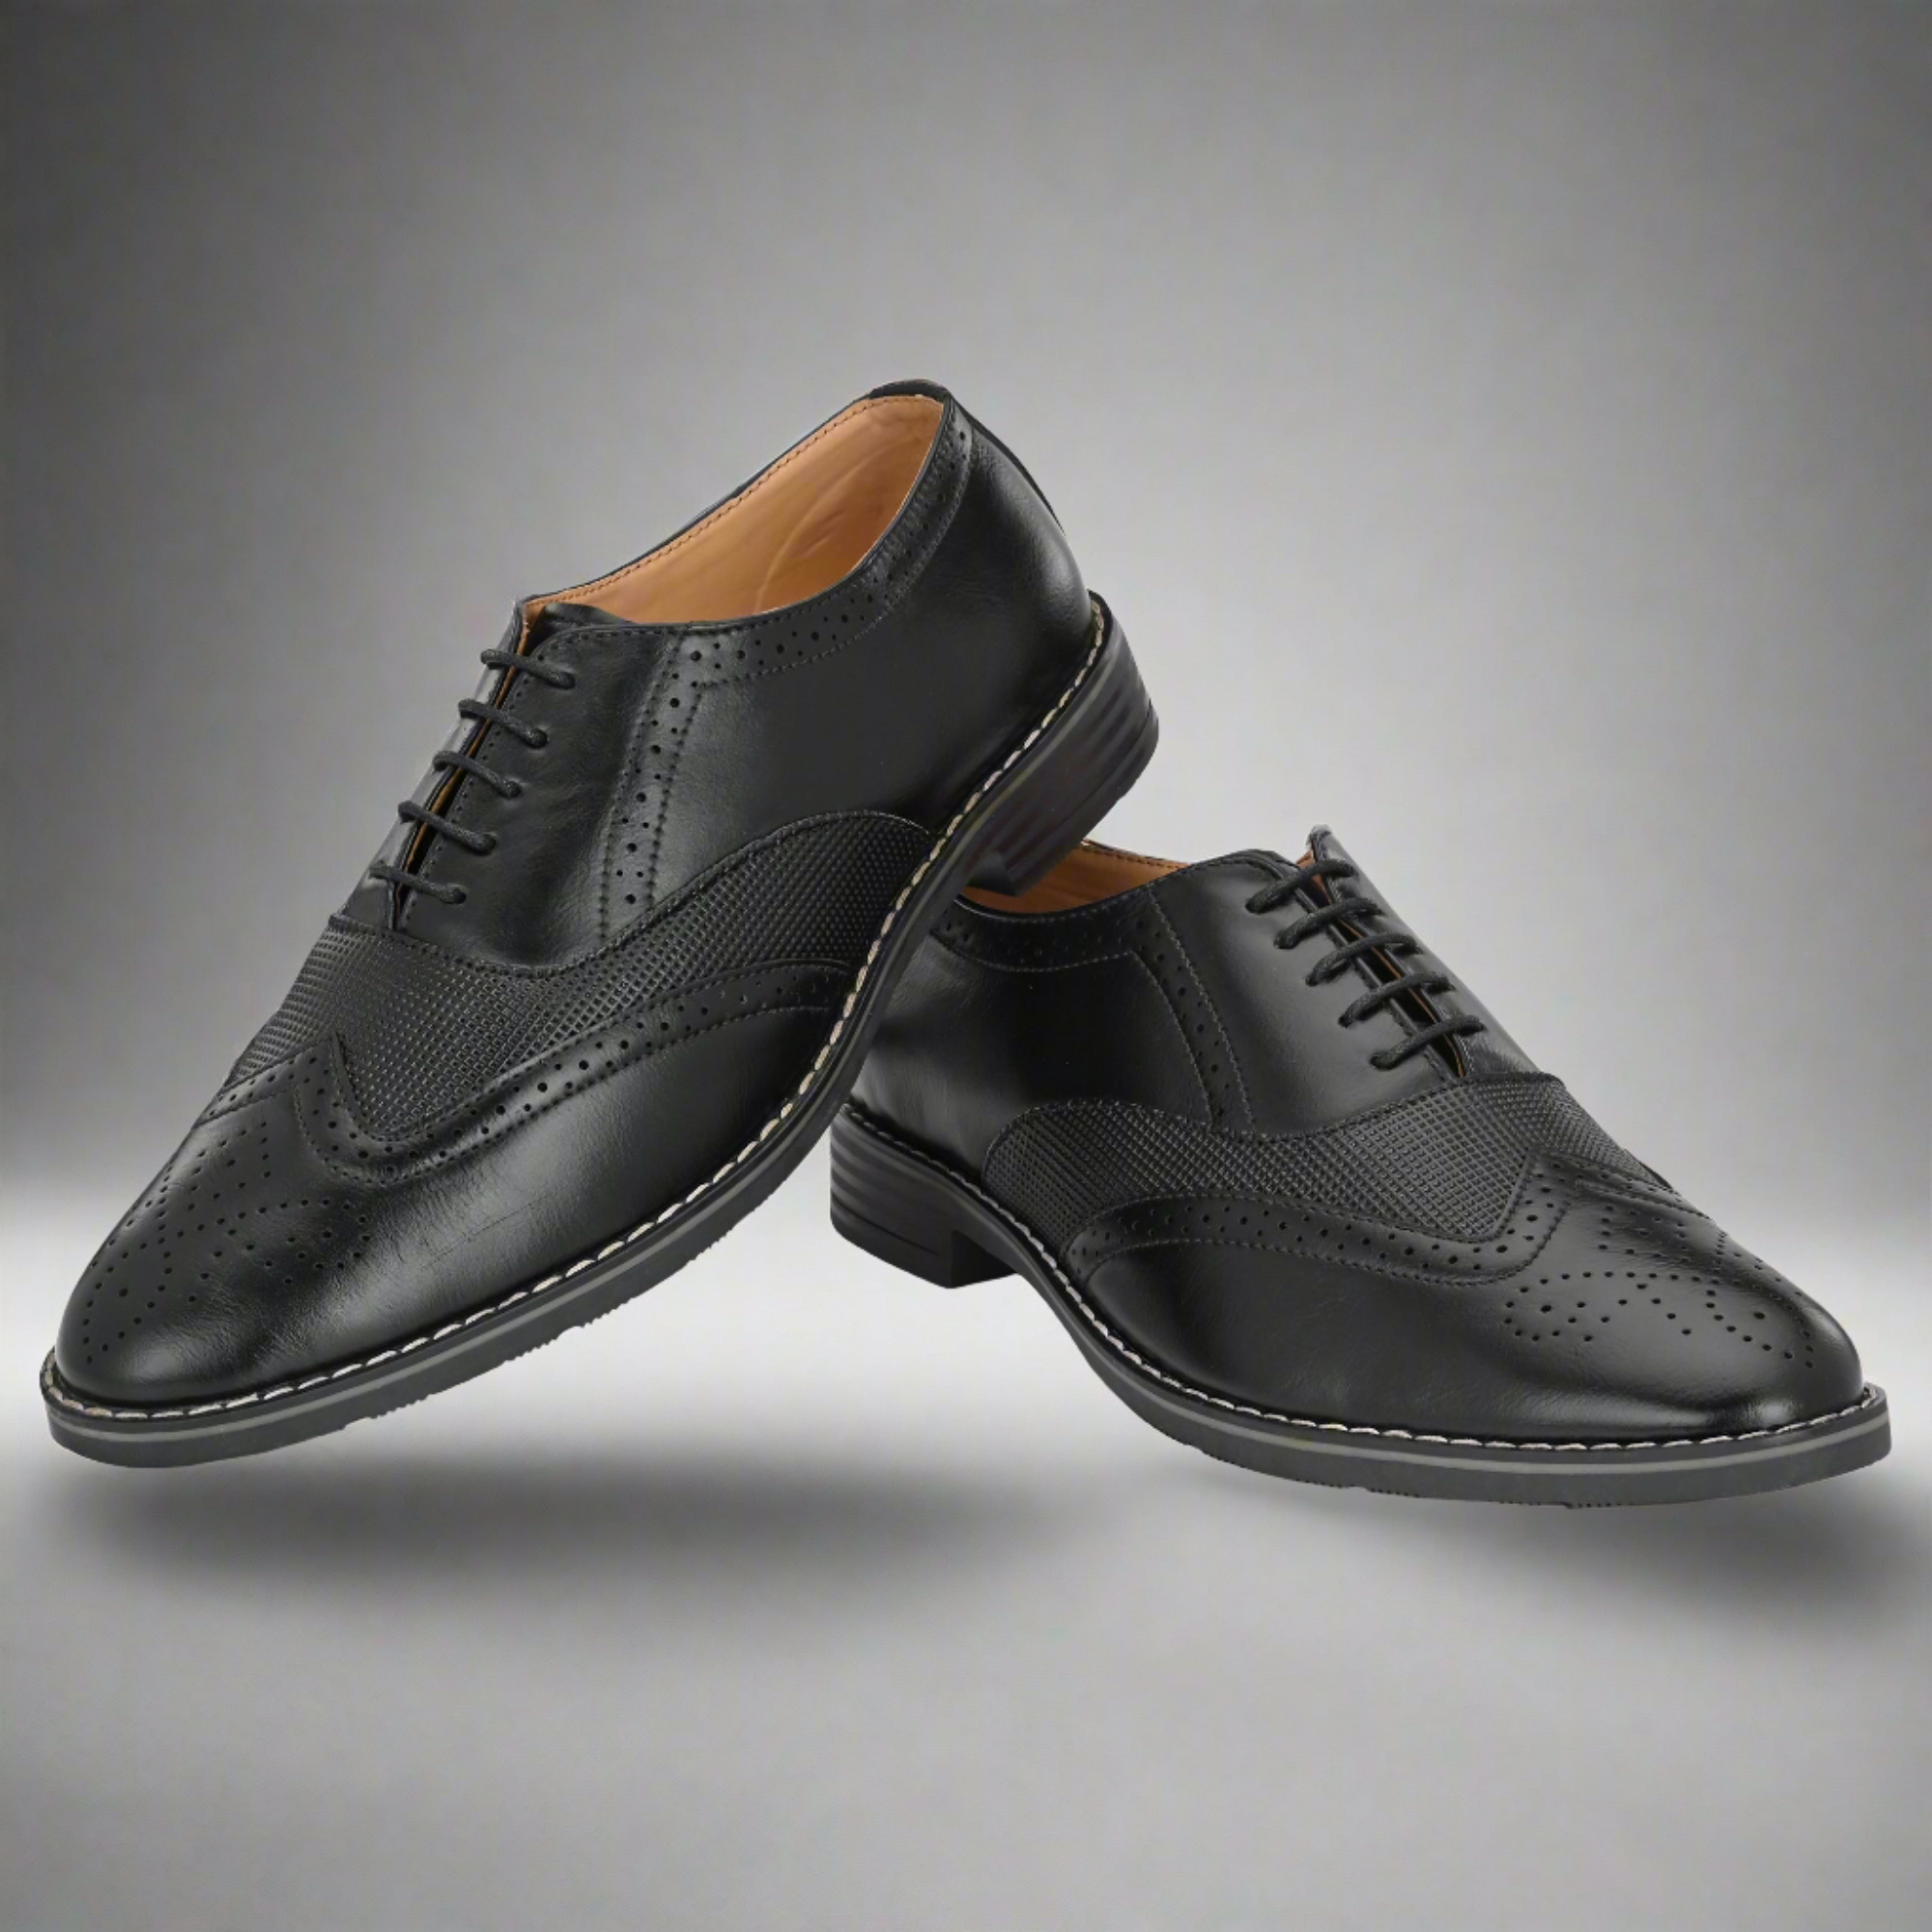 Attitudist Unisex Handcrafted Black Formal Lace-up Derby Shoes Full Brouges With Wingtips